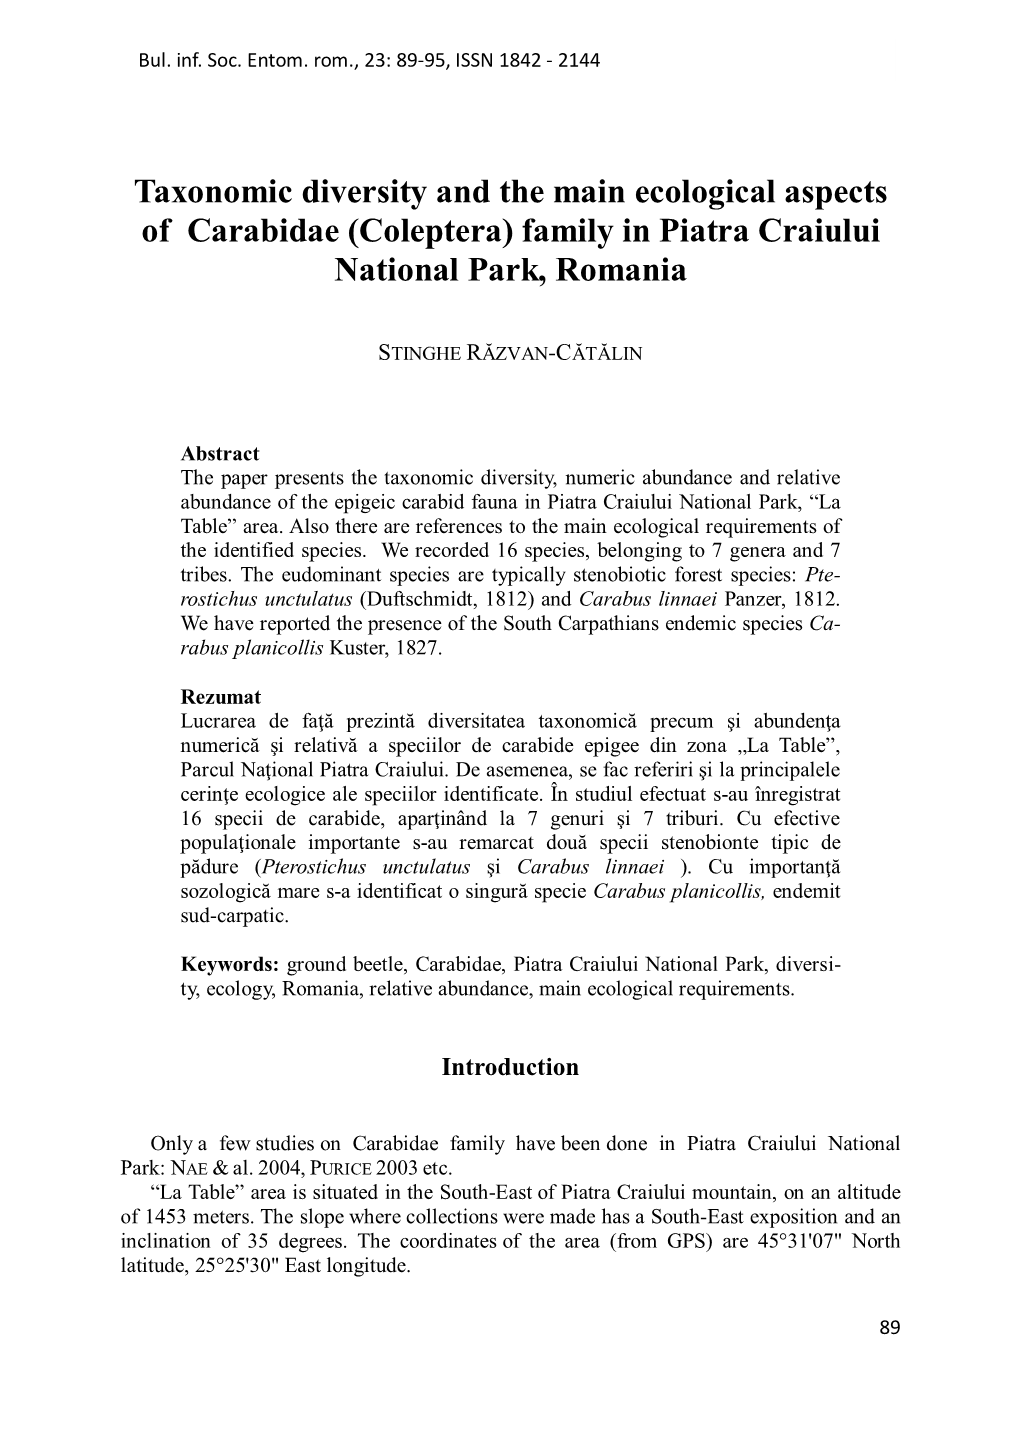 Taxonomic Diversity and the Main Ecological Aspects of Carabidae (Coleptera) Family in Piatra Craiului National Park, Romania